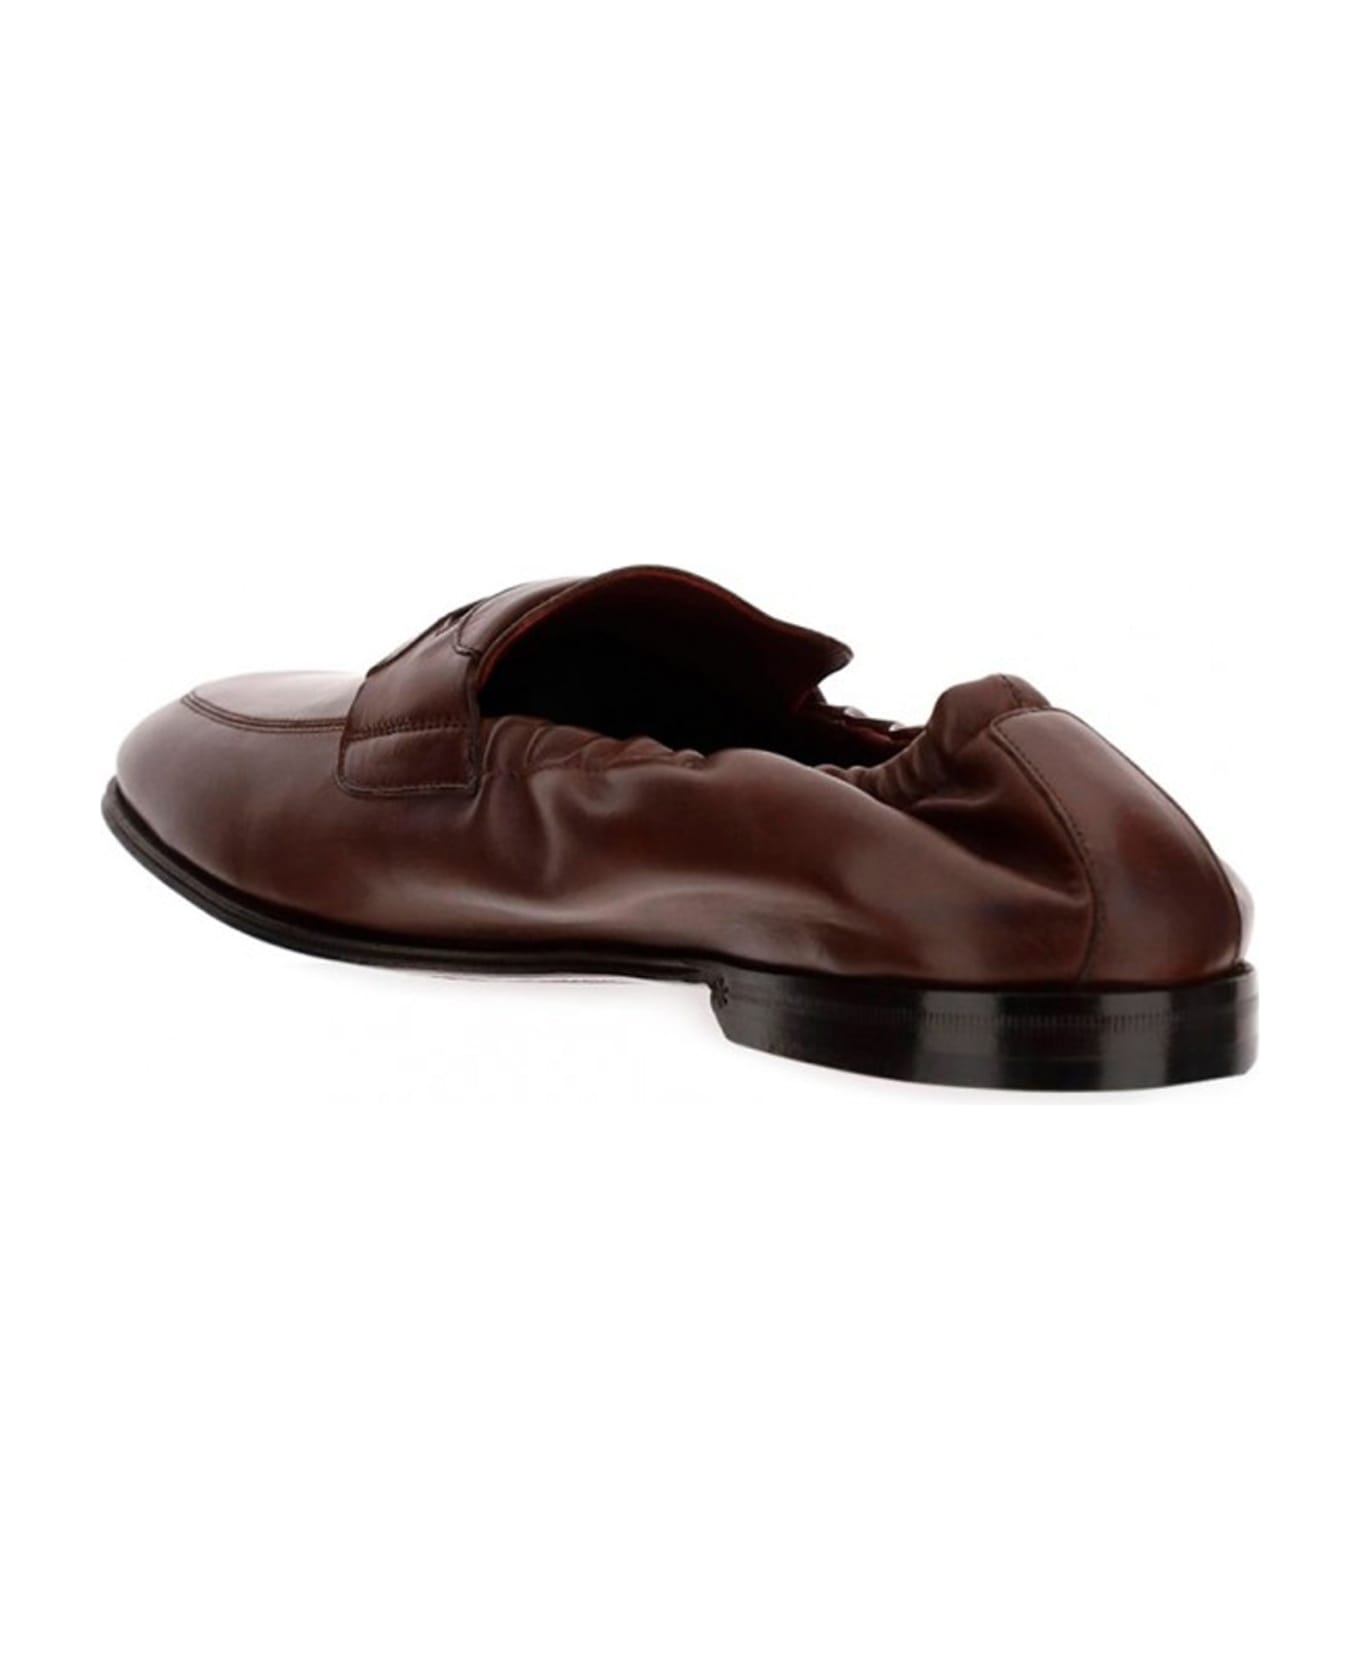 Dolce & Gabbana Leather Loafers - Brown ローファー＆デッキシューズ